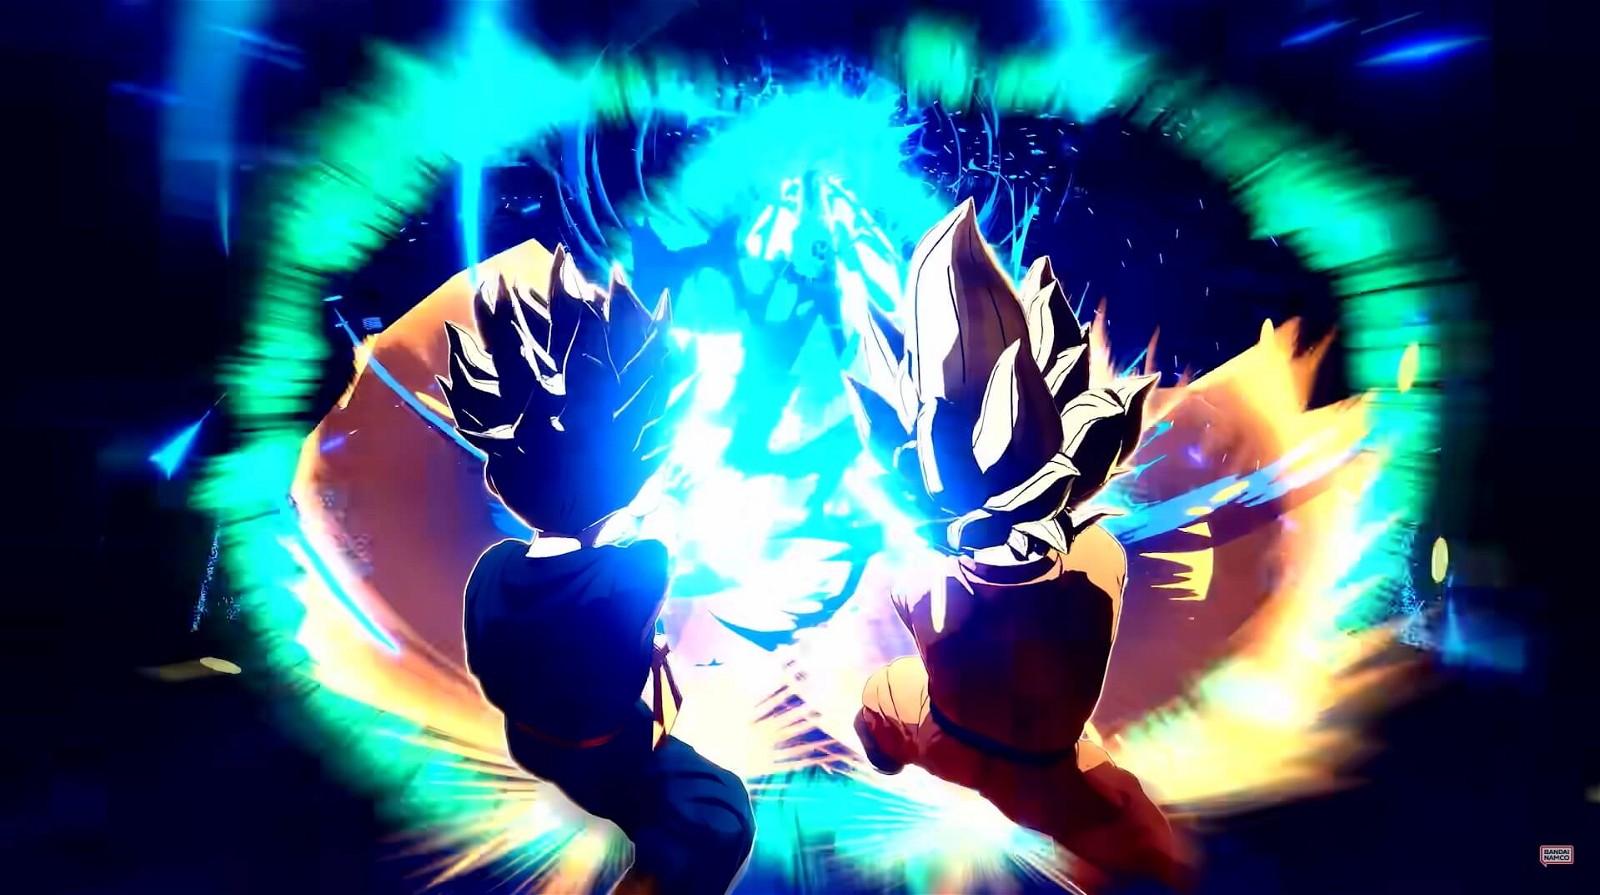 Trunks and Goten executing energy attacks in tandem in Dragon Ball: Sparking Zero. Credits: Bandai Namco